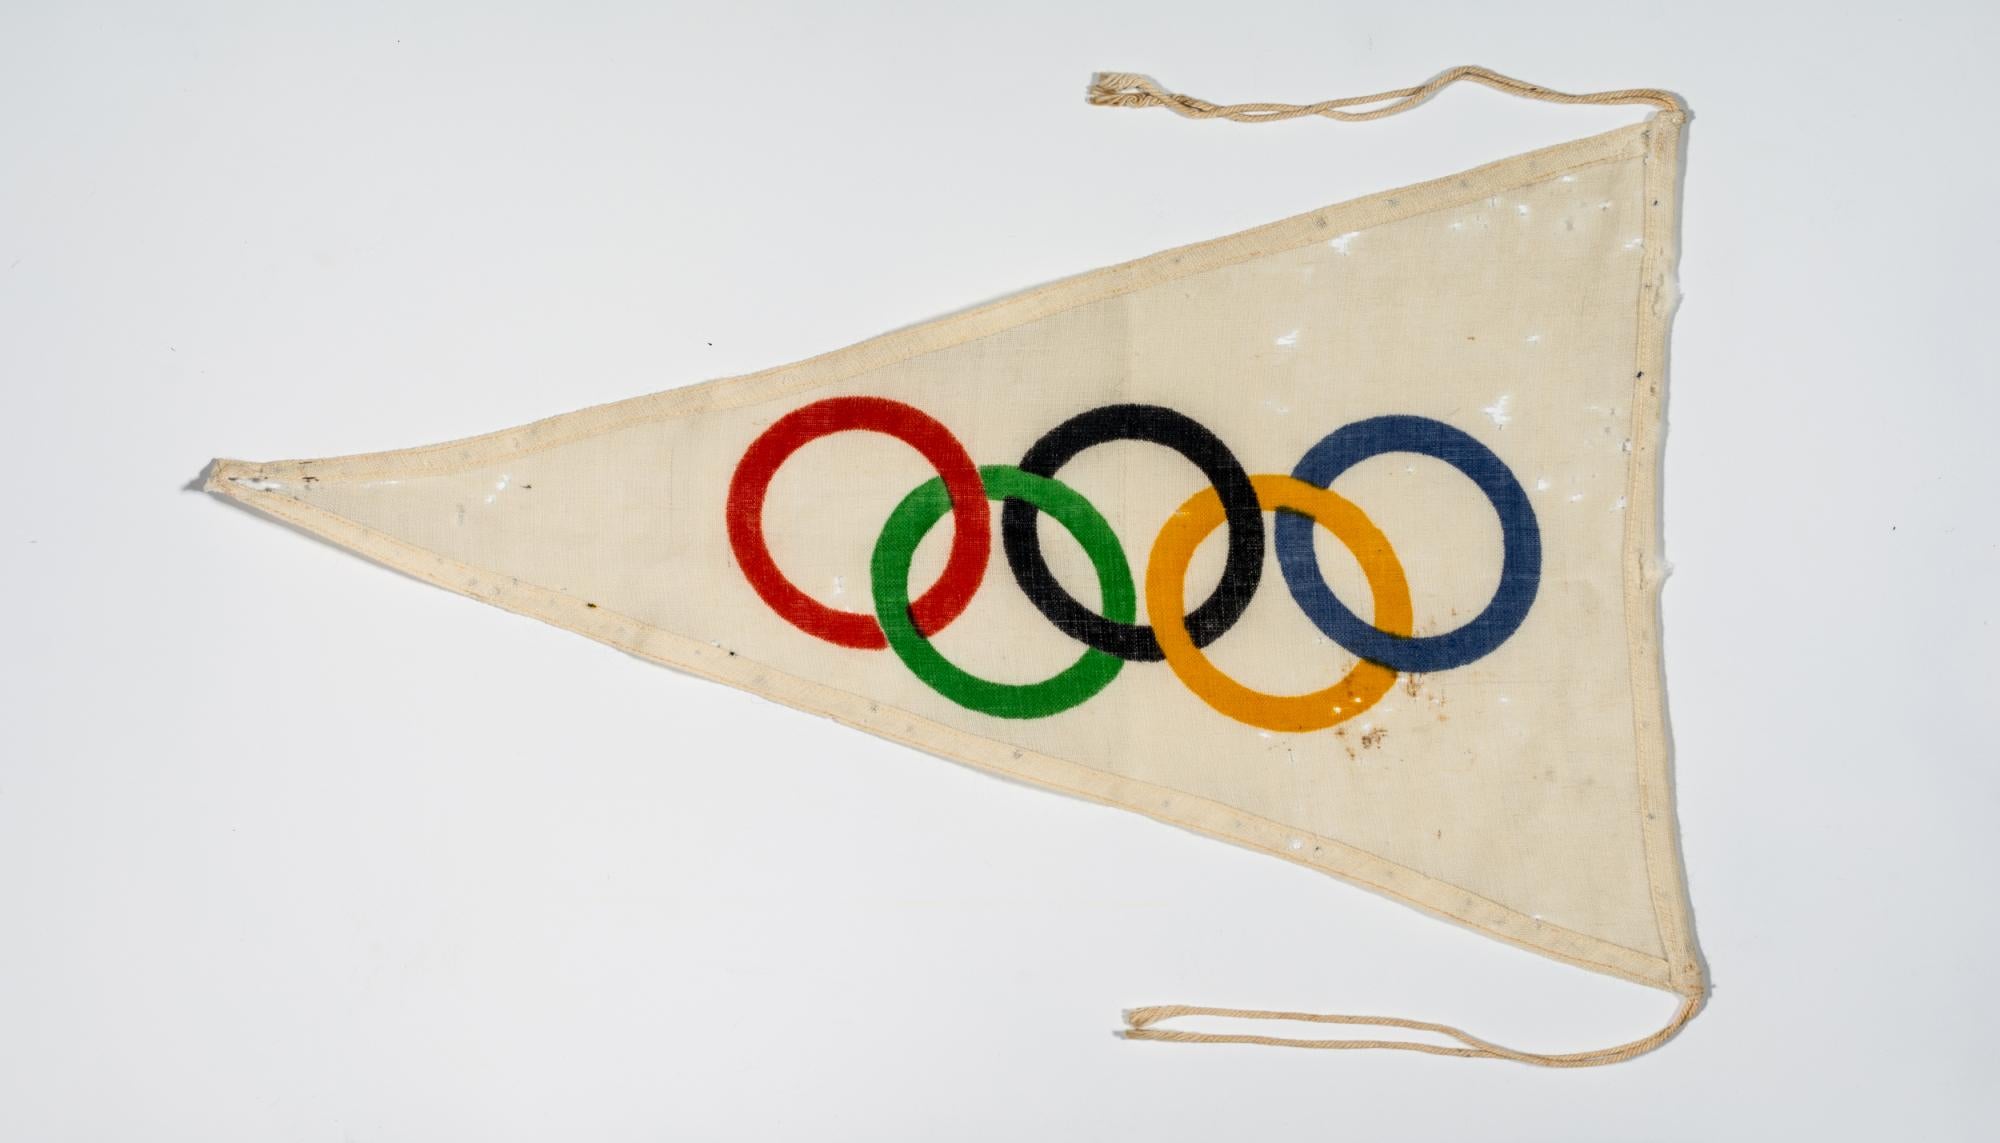 A pennant with the Olympic rings